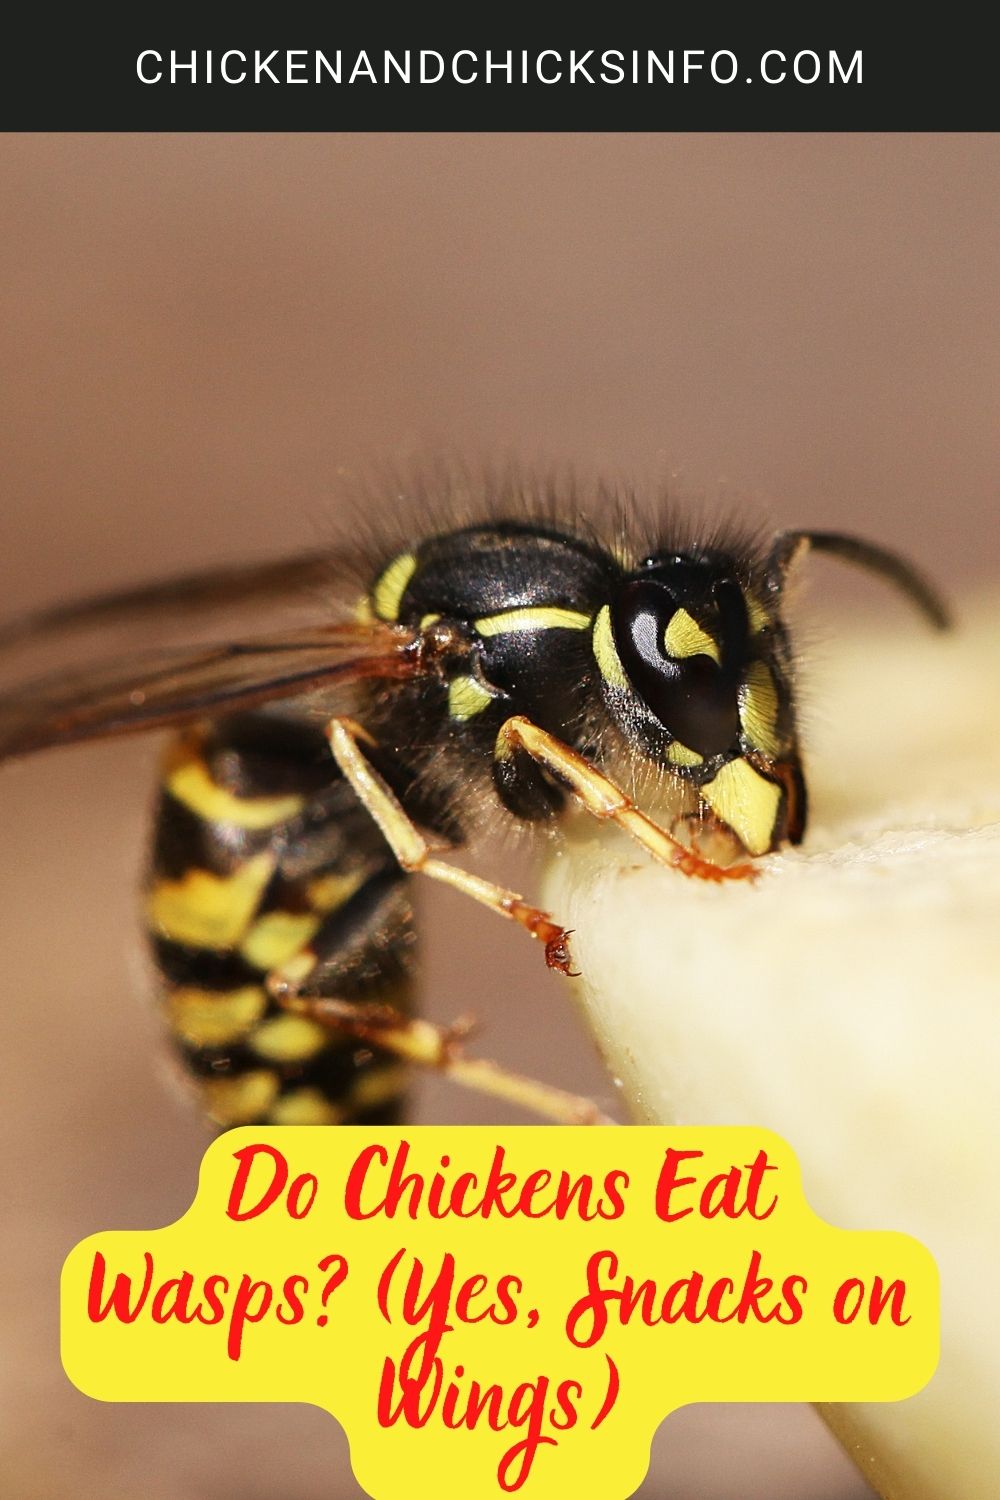 Do Chickens Eat Wasps? (Yes, Snacks on Wings) poster.
